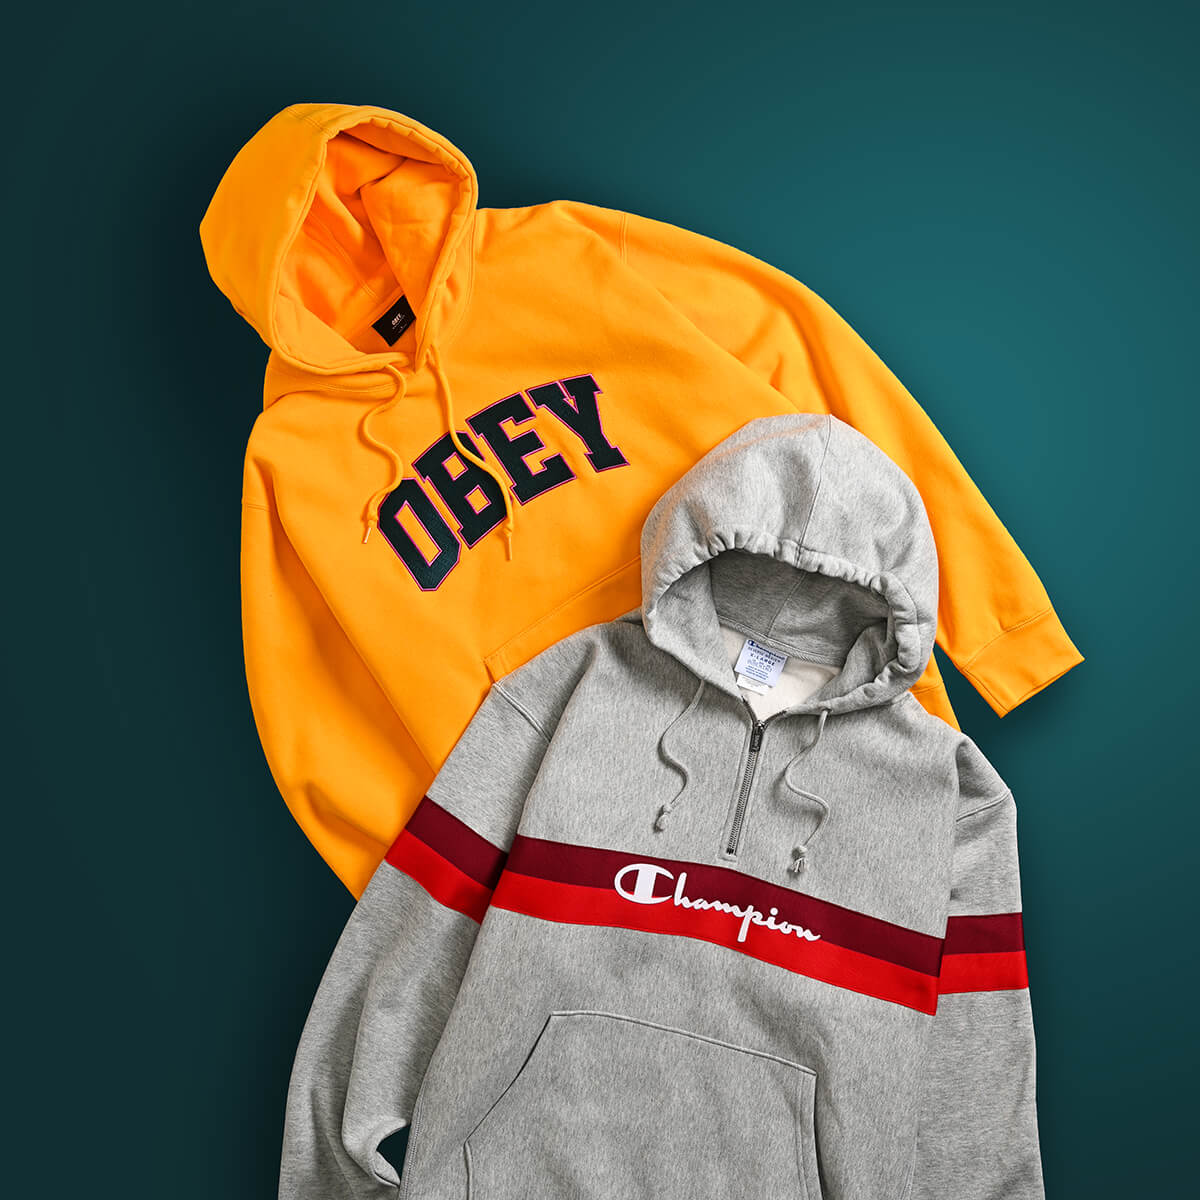 MEN'S HOODIES FEAT. OBEY, CHAMPION & MORE